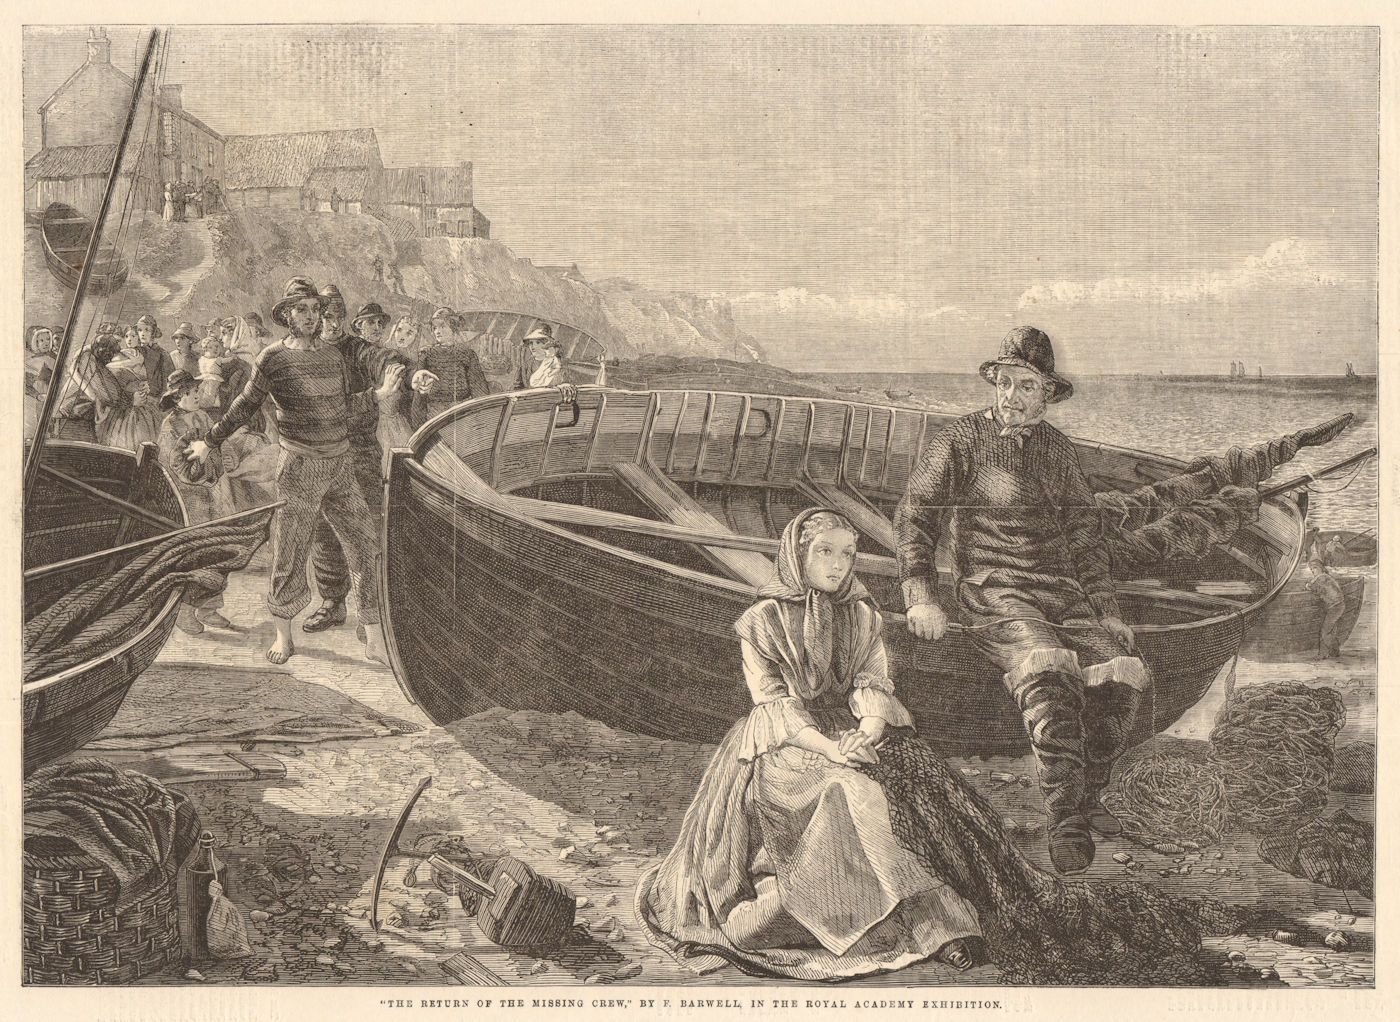 Associate Product The return of the missing crew by F. Barwell. Fishermen. Ships 1860 ILN print